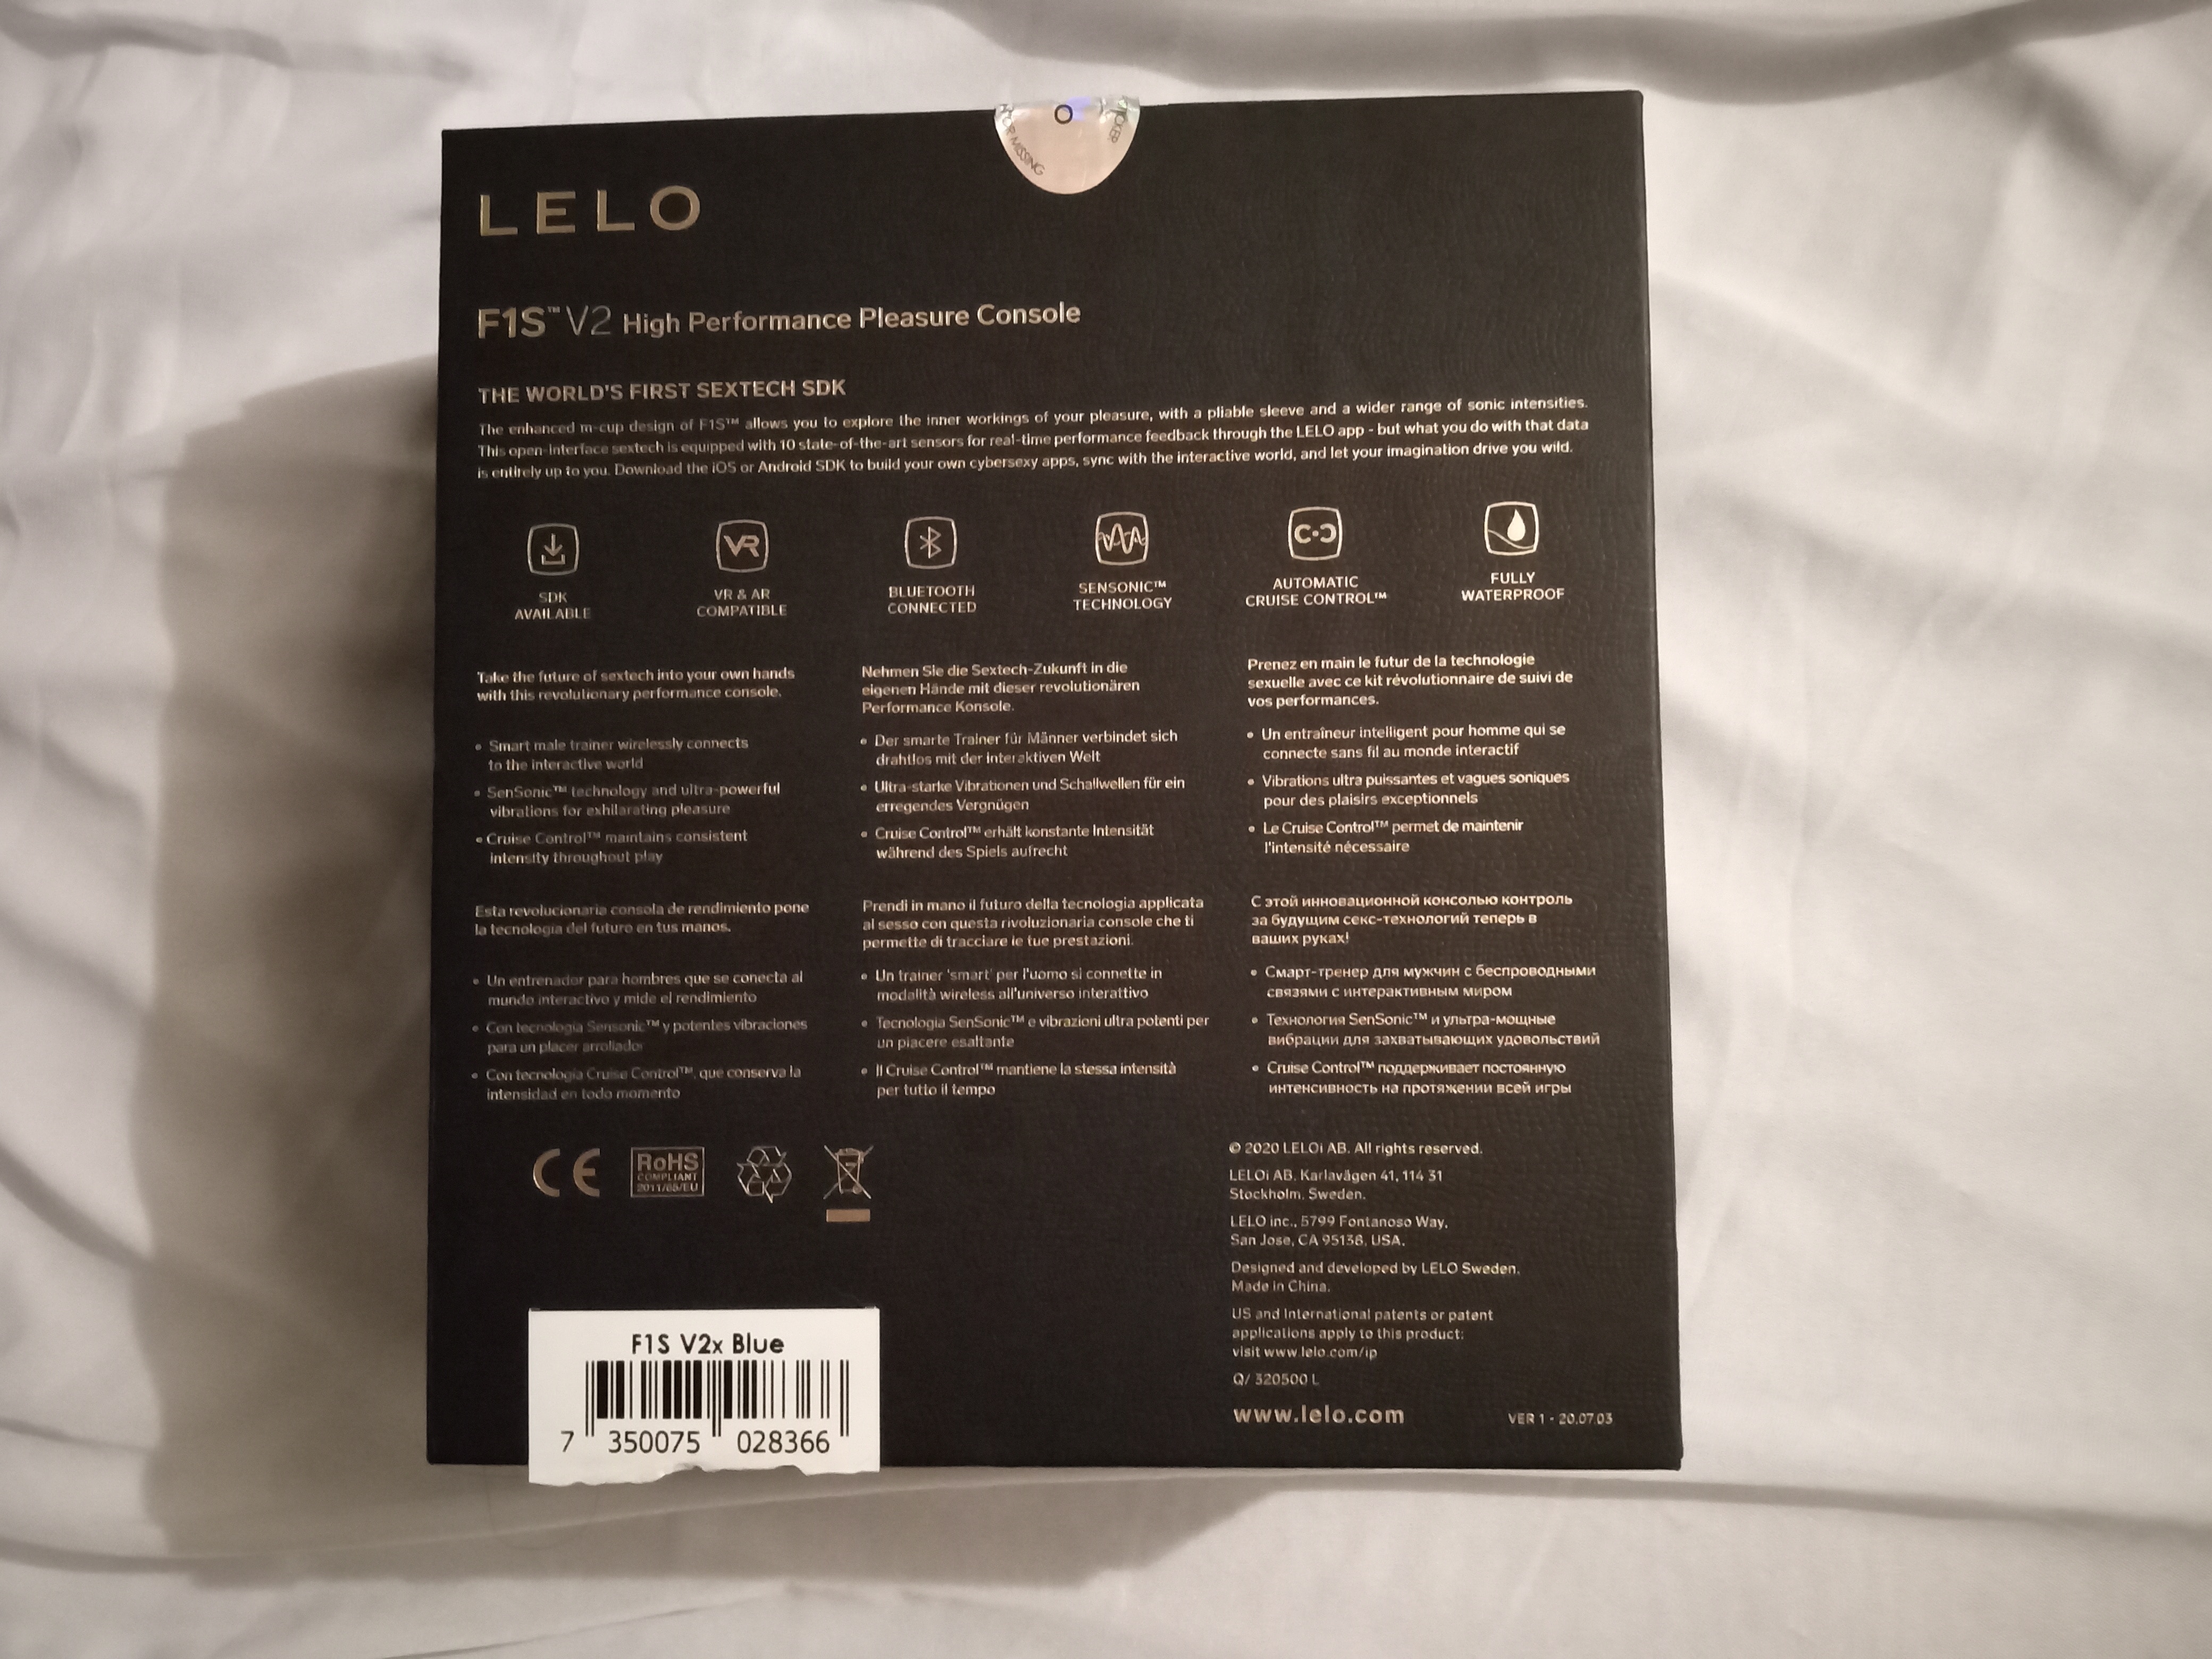 LELO F1S V2 A closer Look at it’s packaging